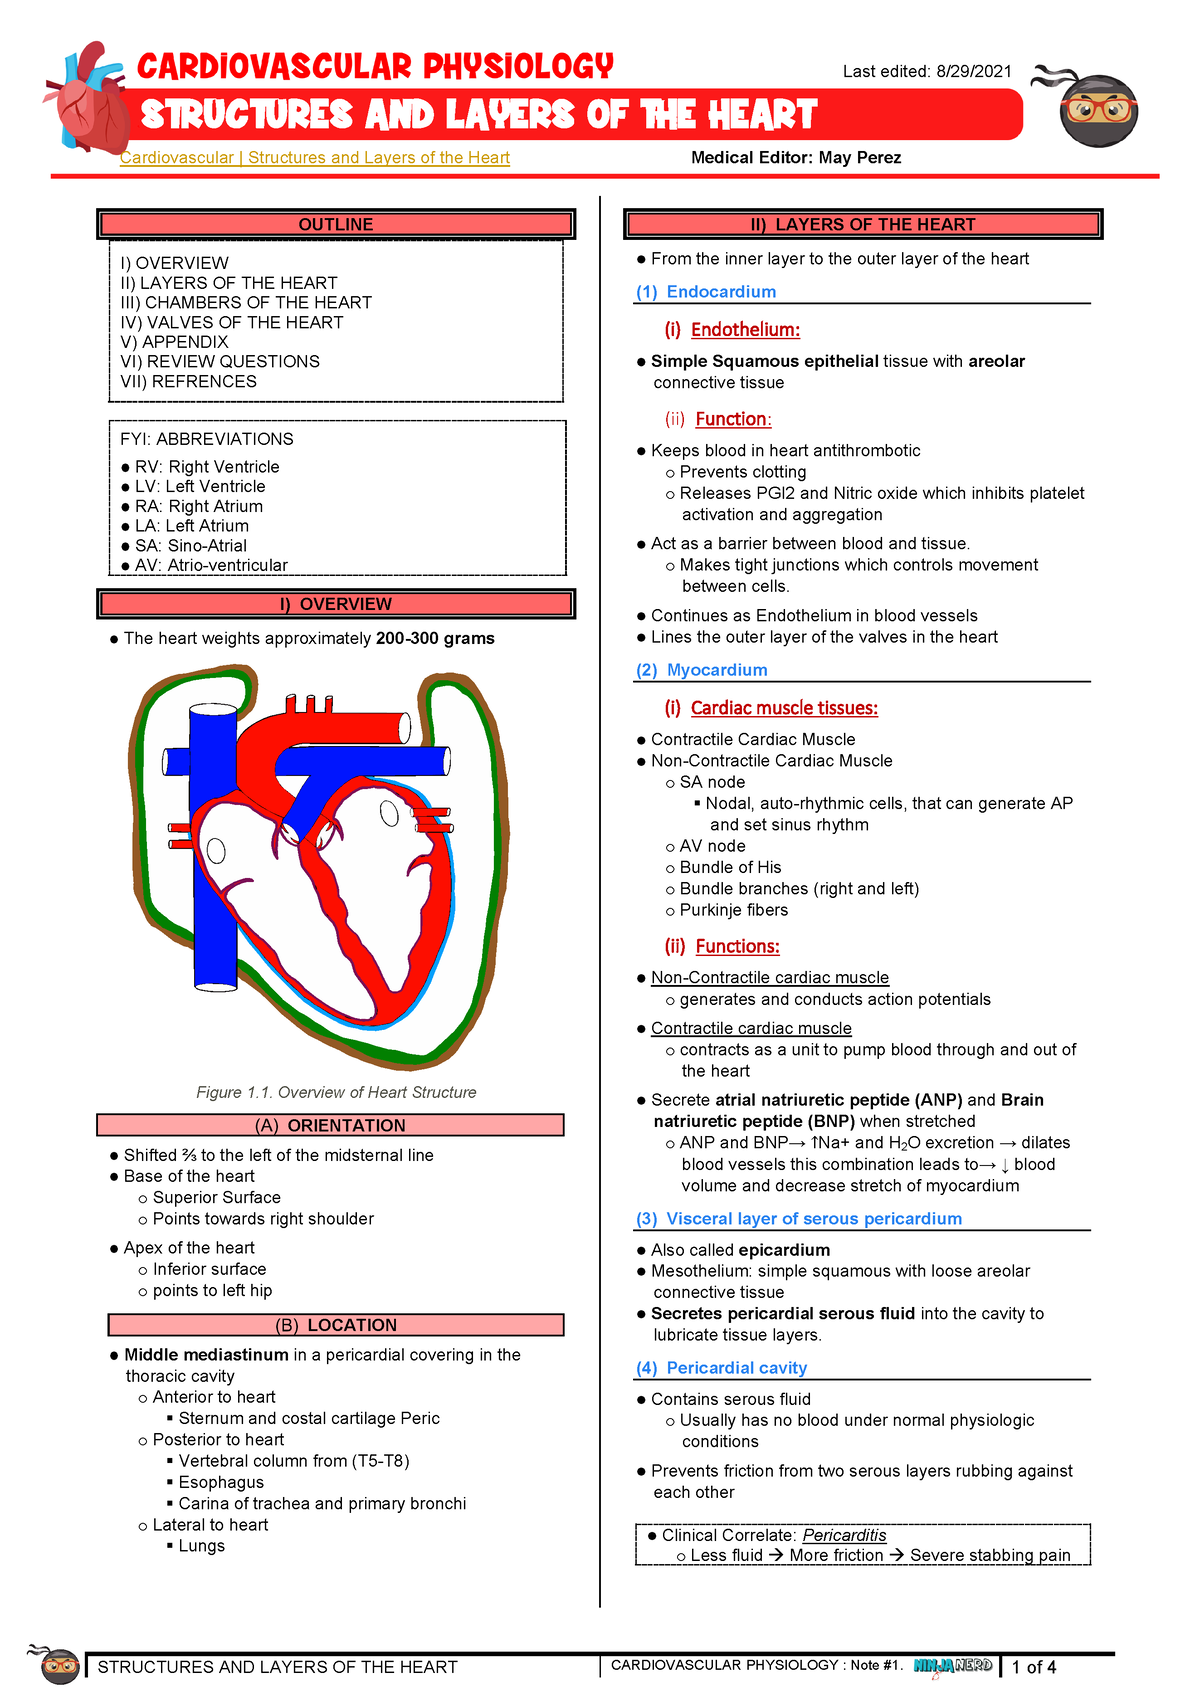 003 - Cardiovascular Physiology] Structures and Layers of the Heart 001 ...